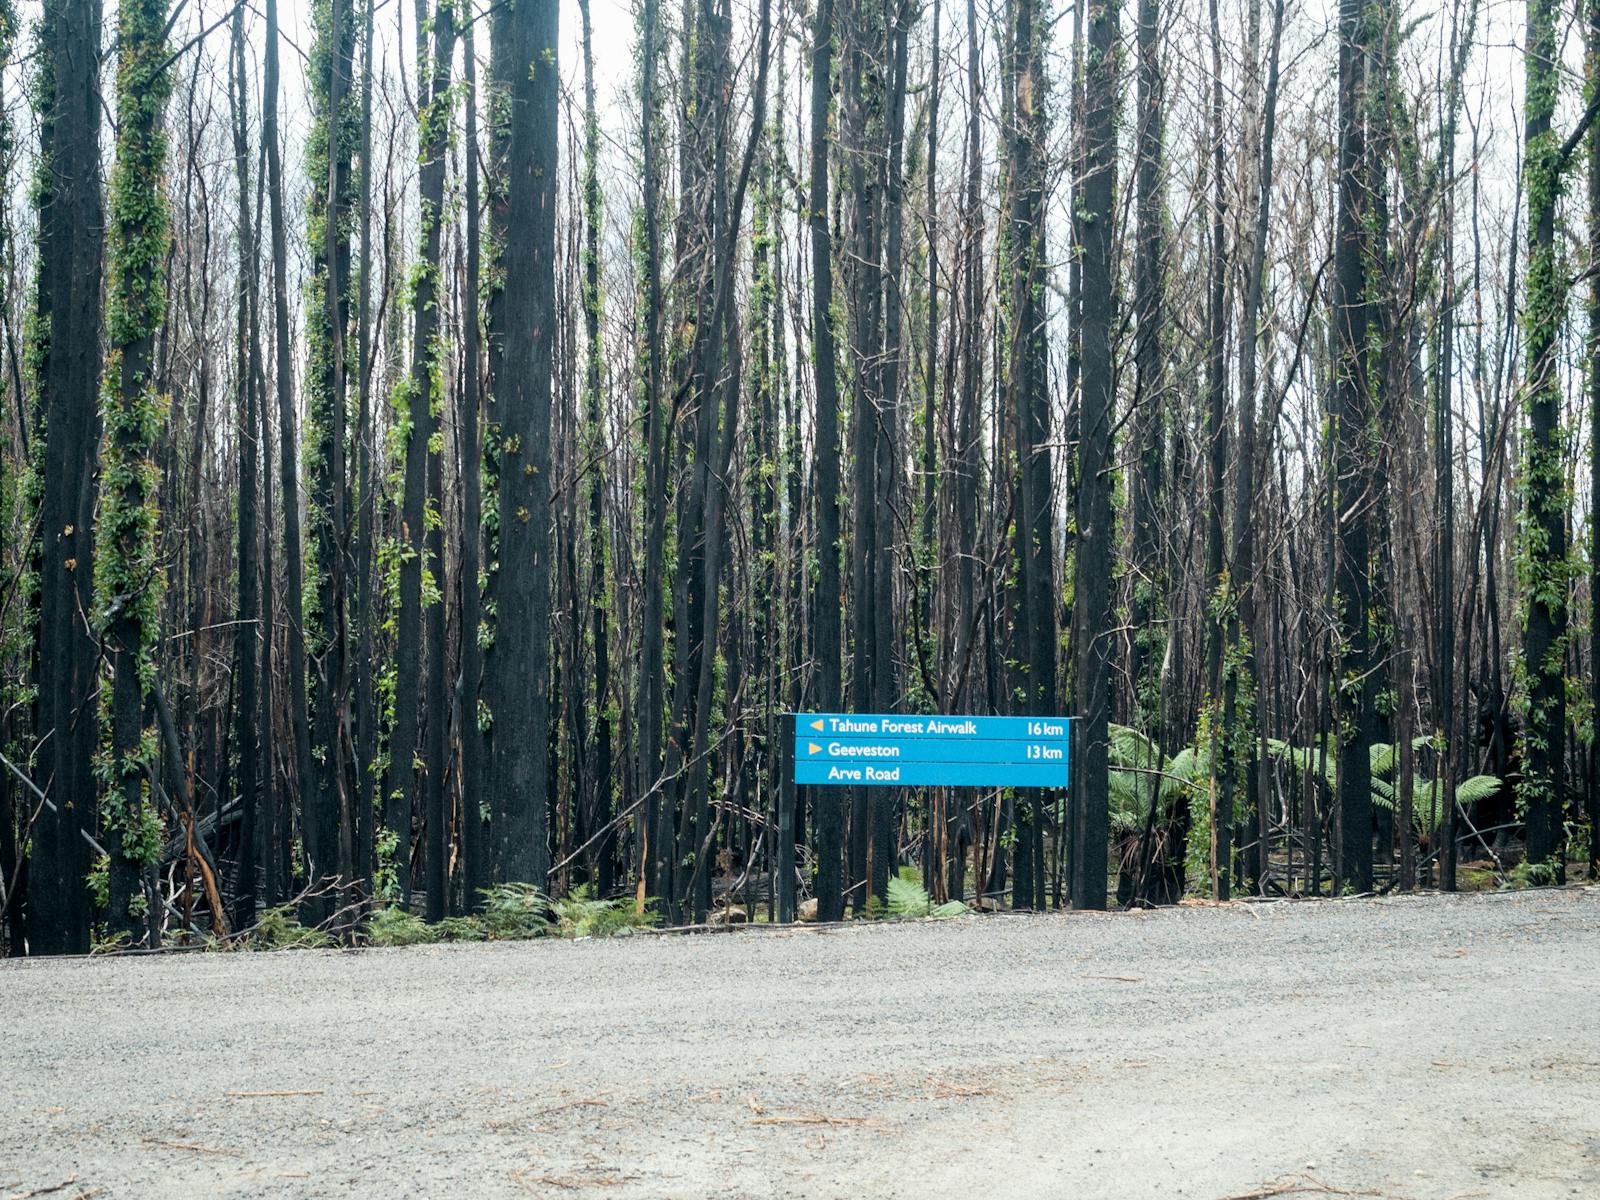 Road sign in front of burnt trees with strong regrowth